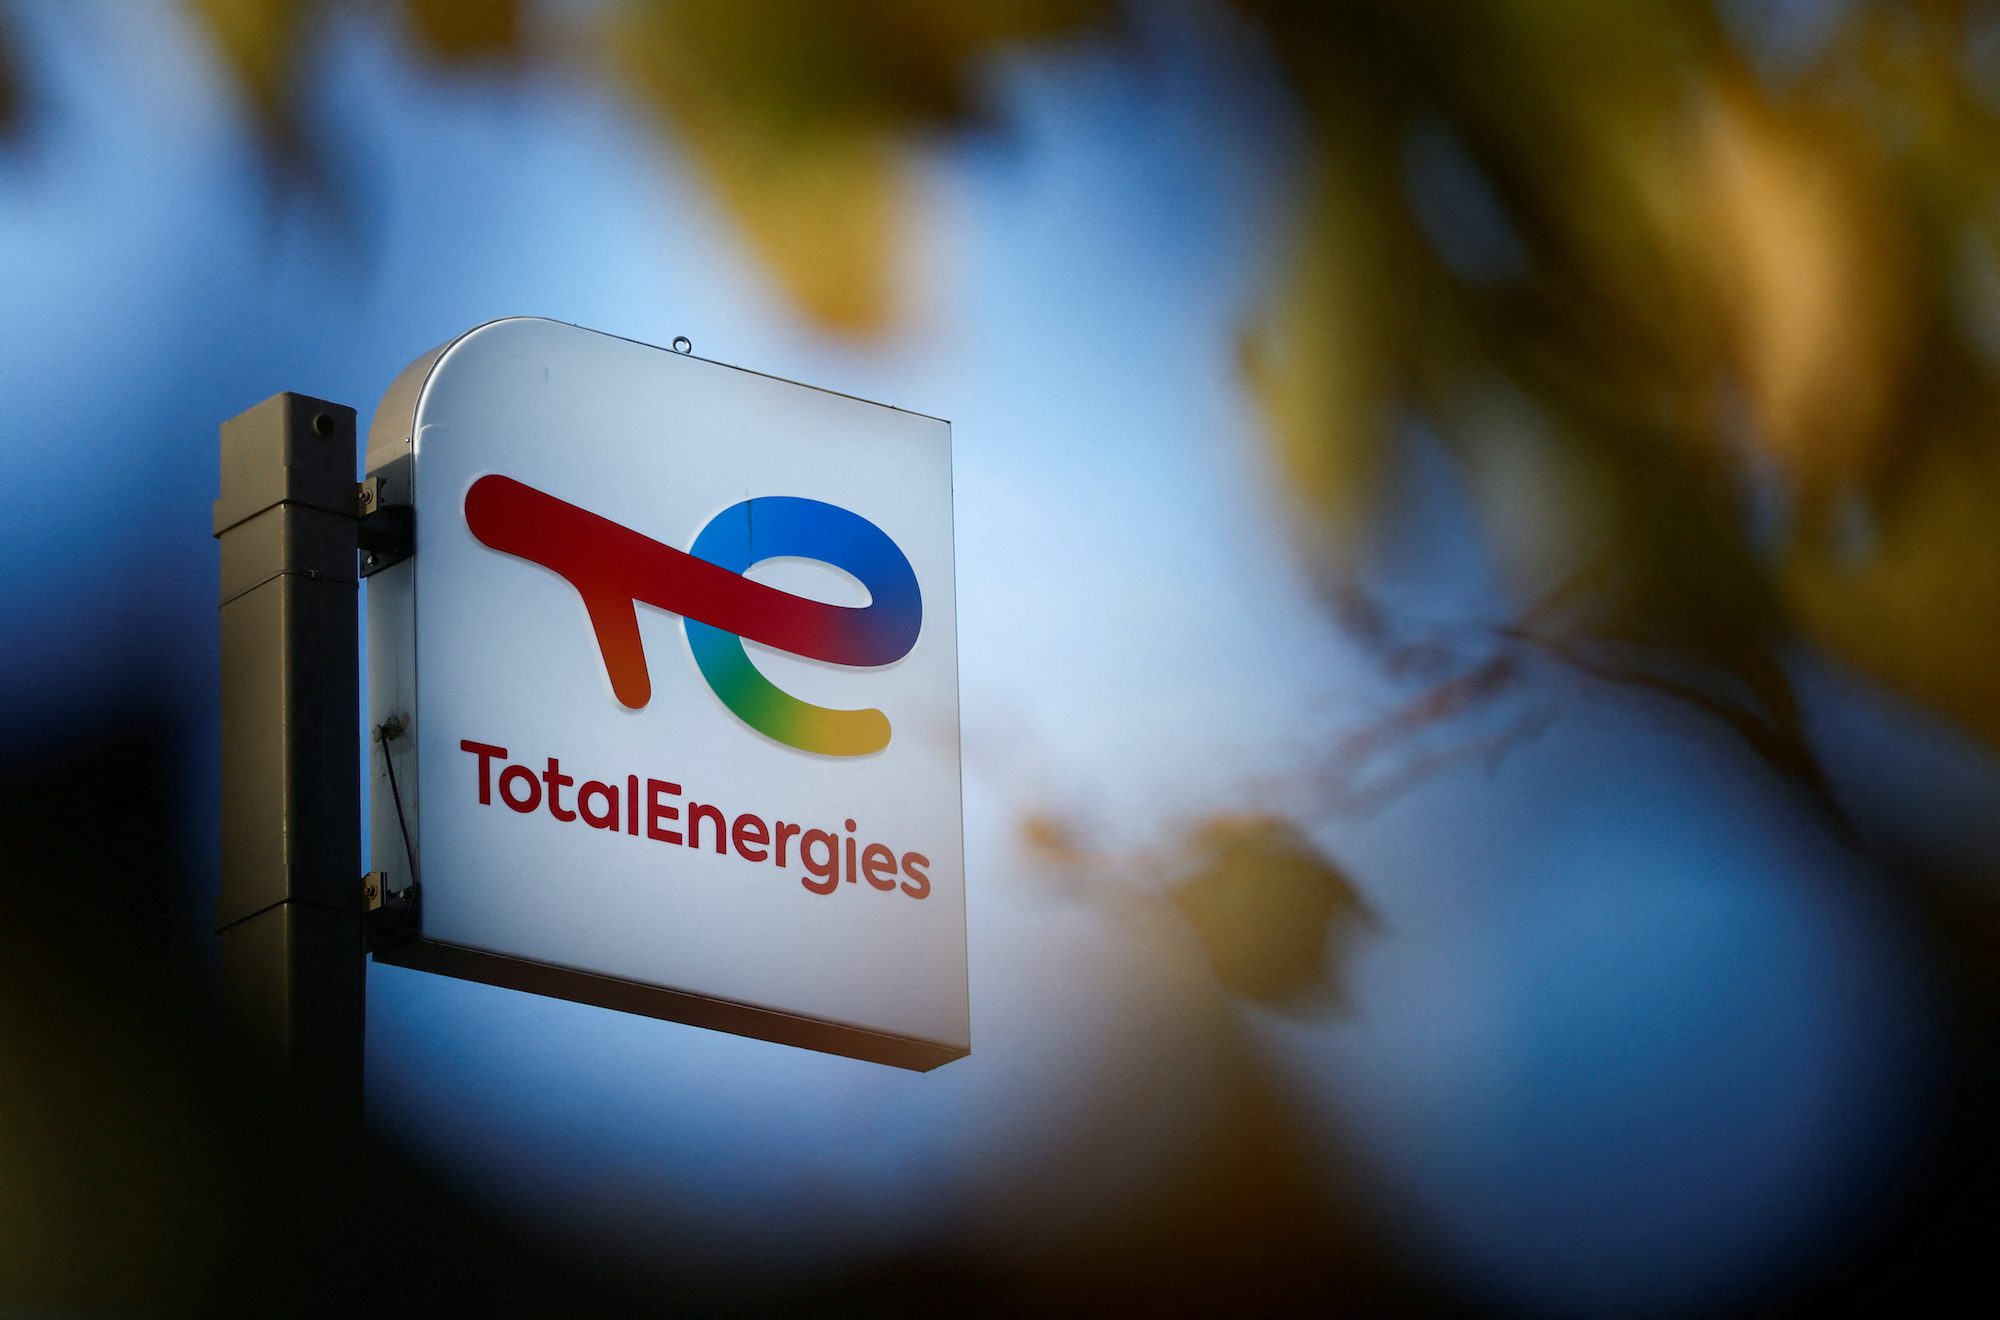 TotalEnergies Joins Ammonia-Fueled Tanker Project